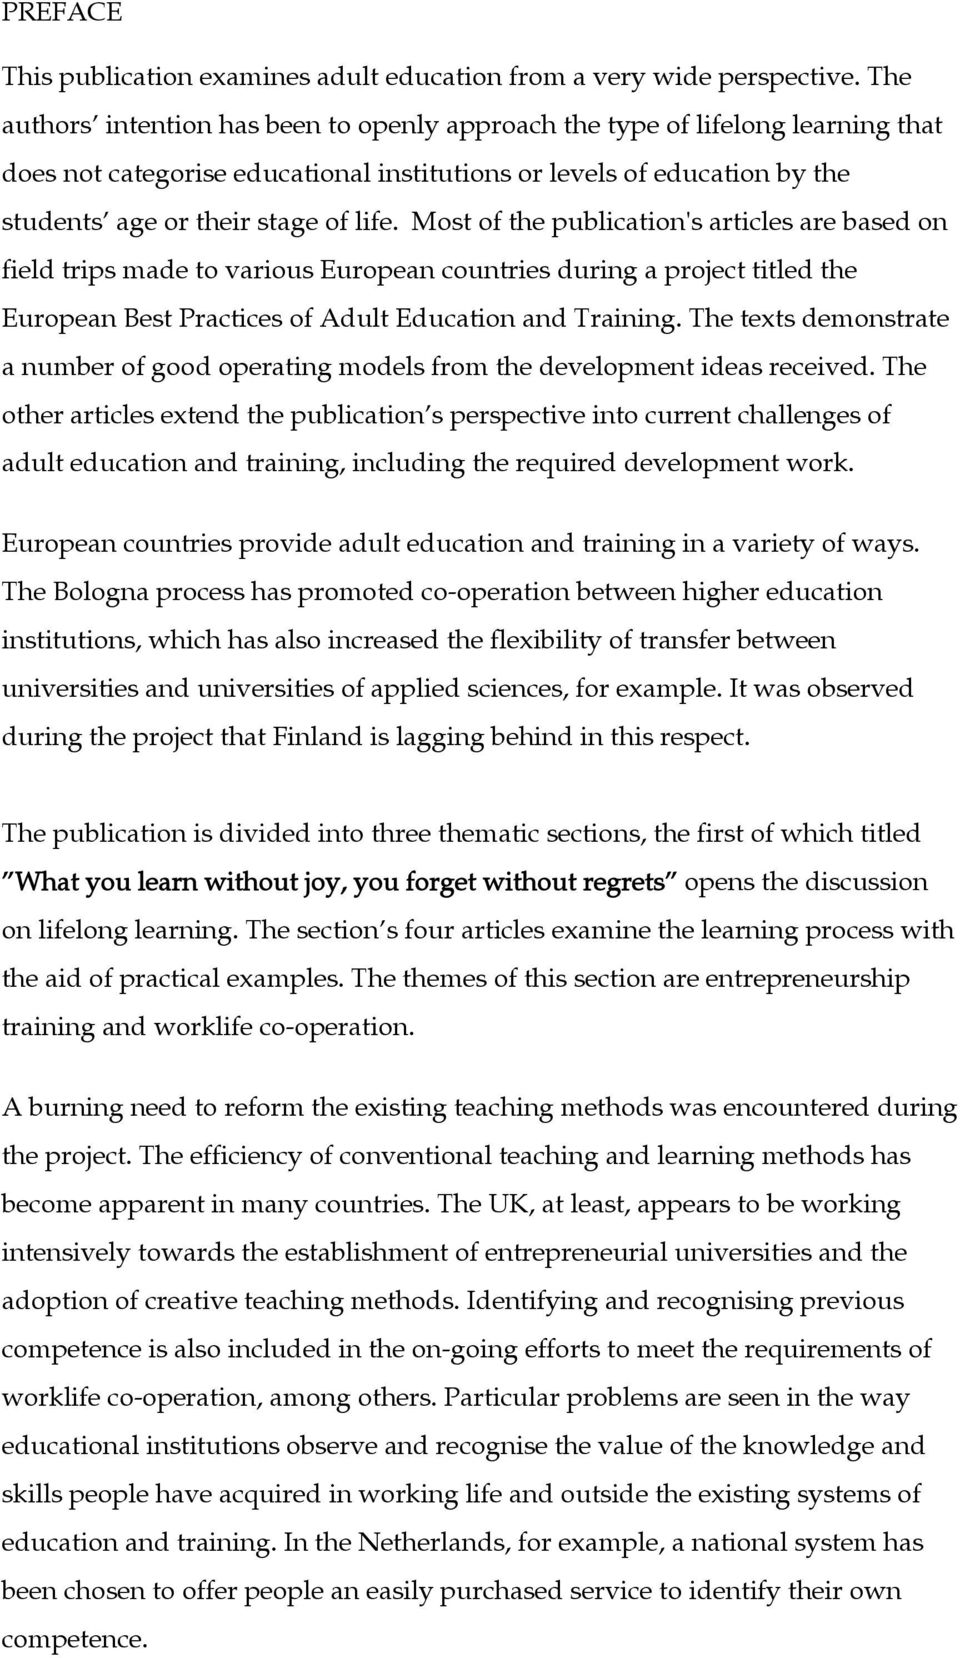 Most of the publication's articles are based on field trips made to various European countries during a project titled the European Best Practices of Adult Education and Training.